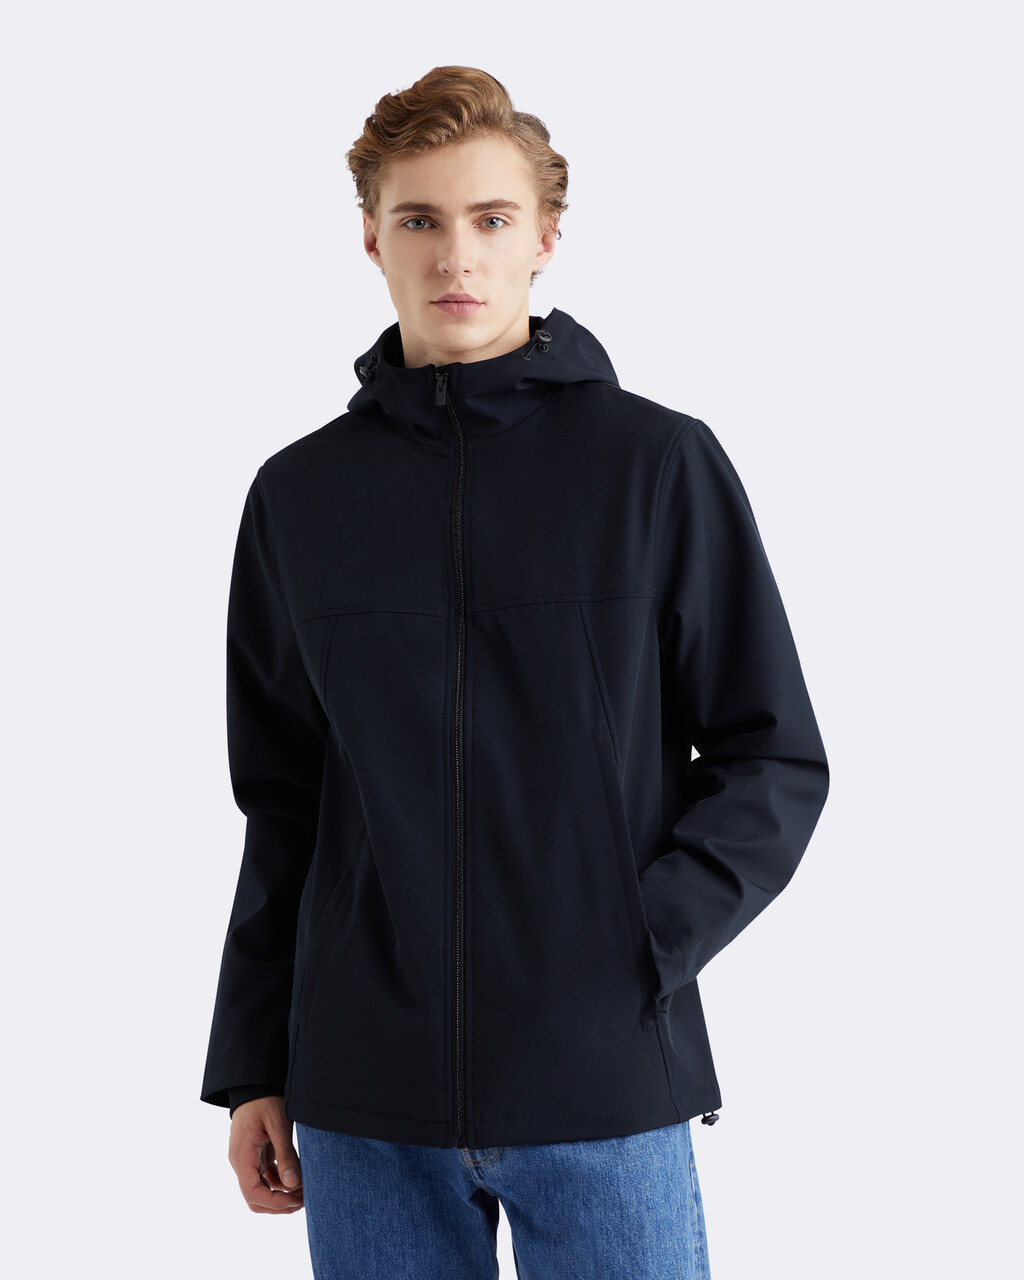 Essential Casual Soft Shell Utility Jacket, Black Beauty, hi-res